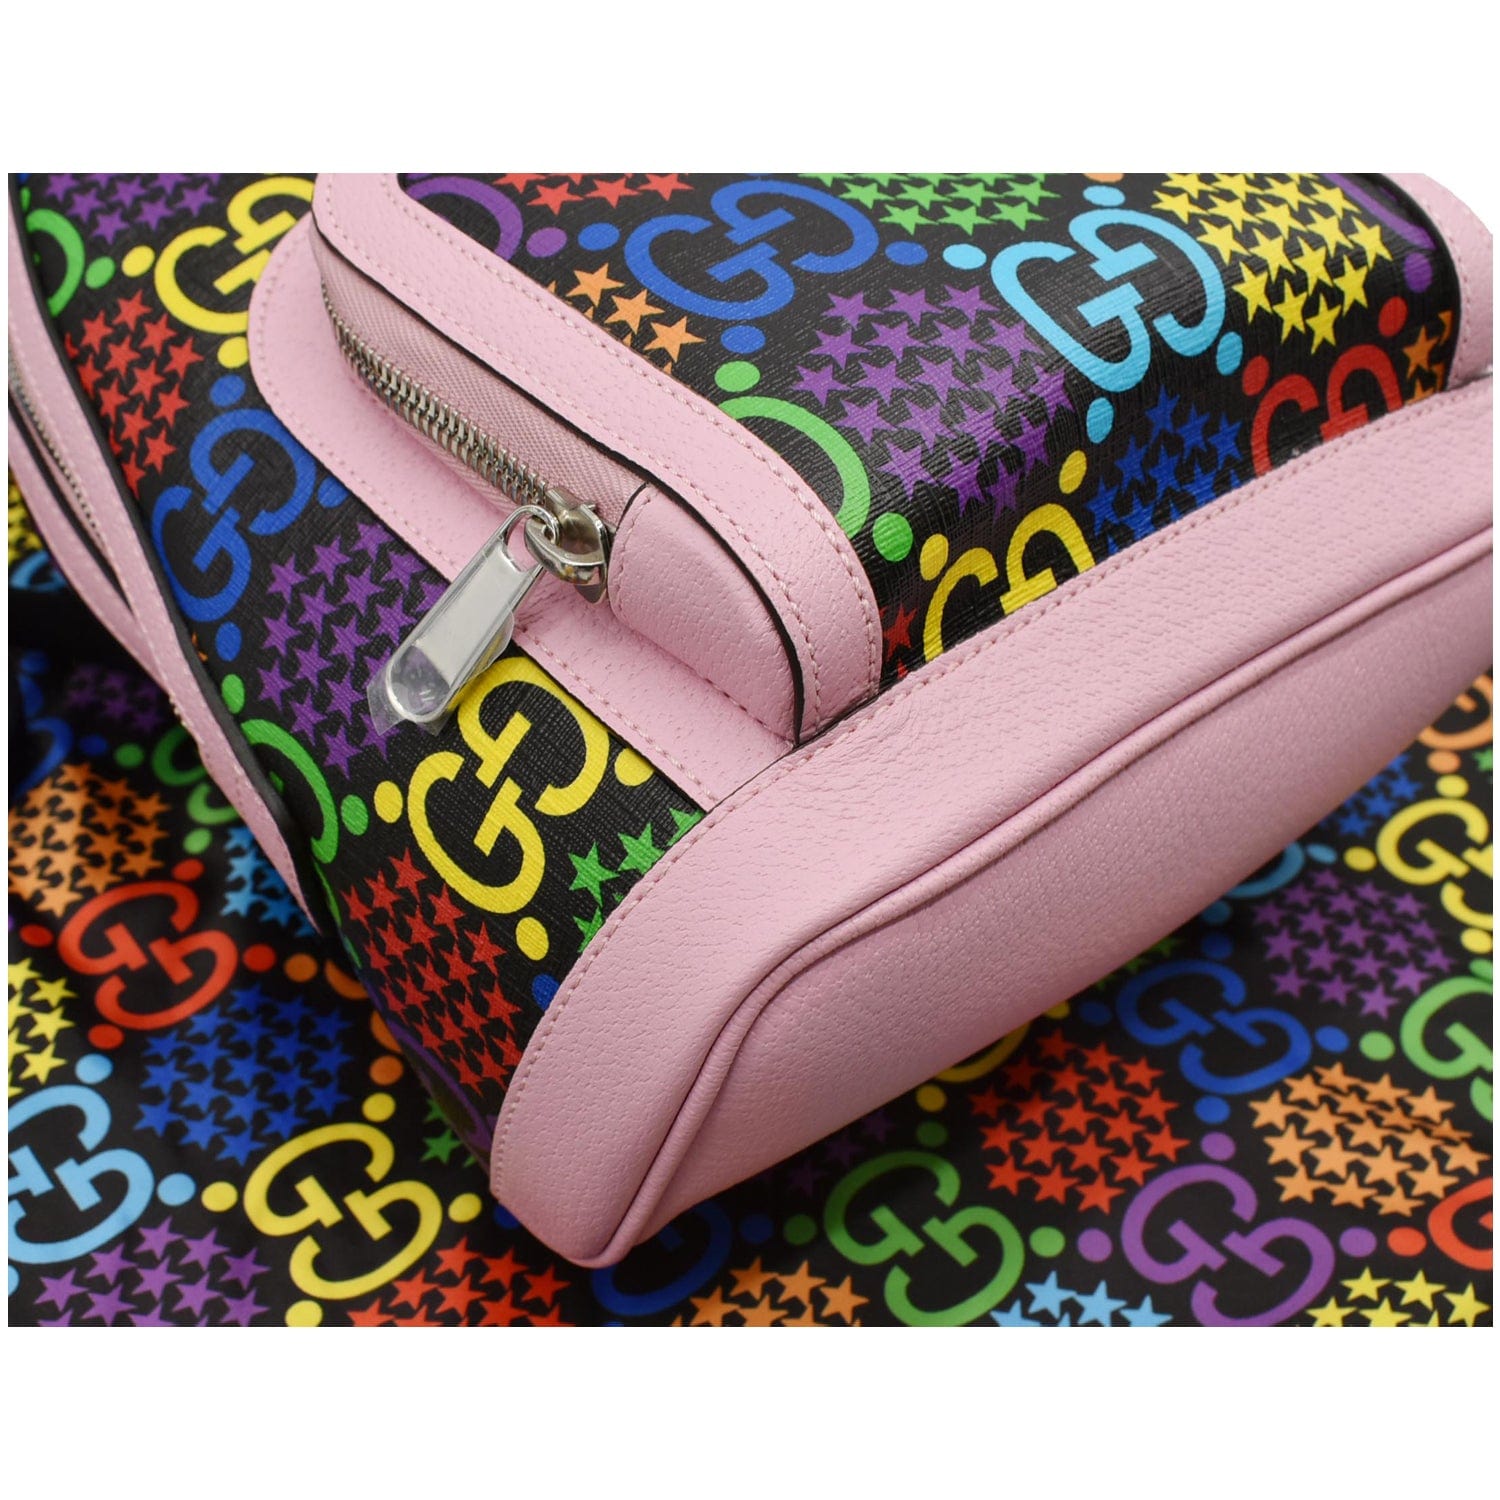 Gucci Small GG Psychedelic Backpack in Pink